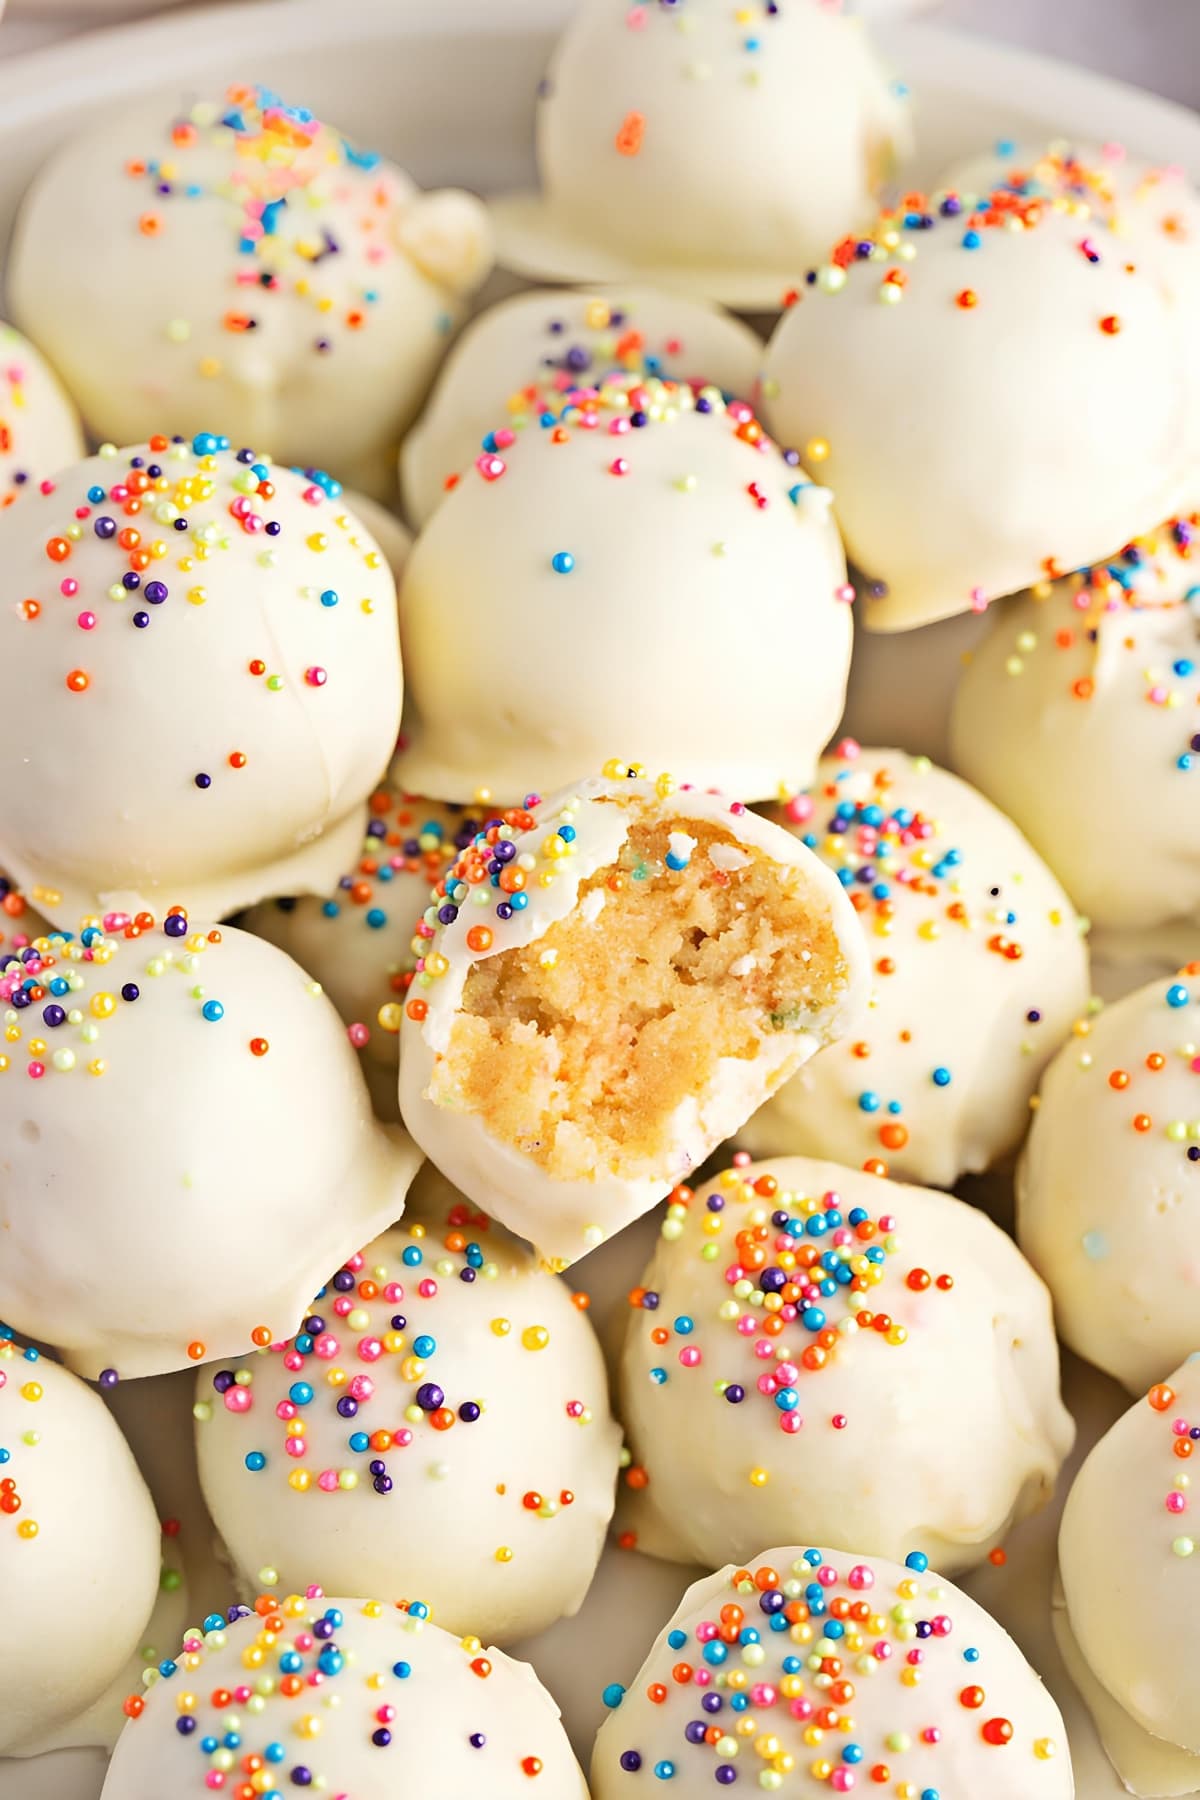 Bite Sized Cake Balls Covered in White Chocolate Shell